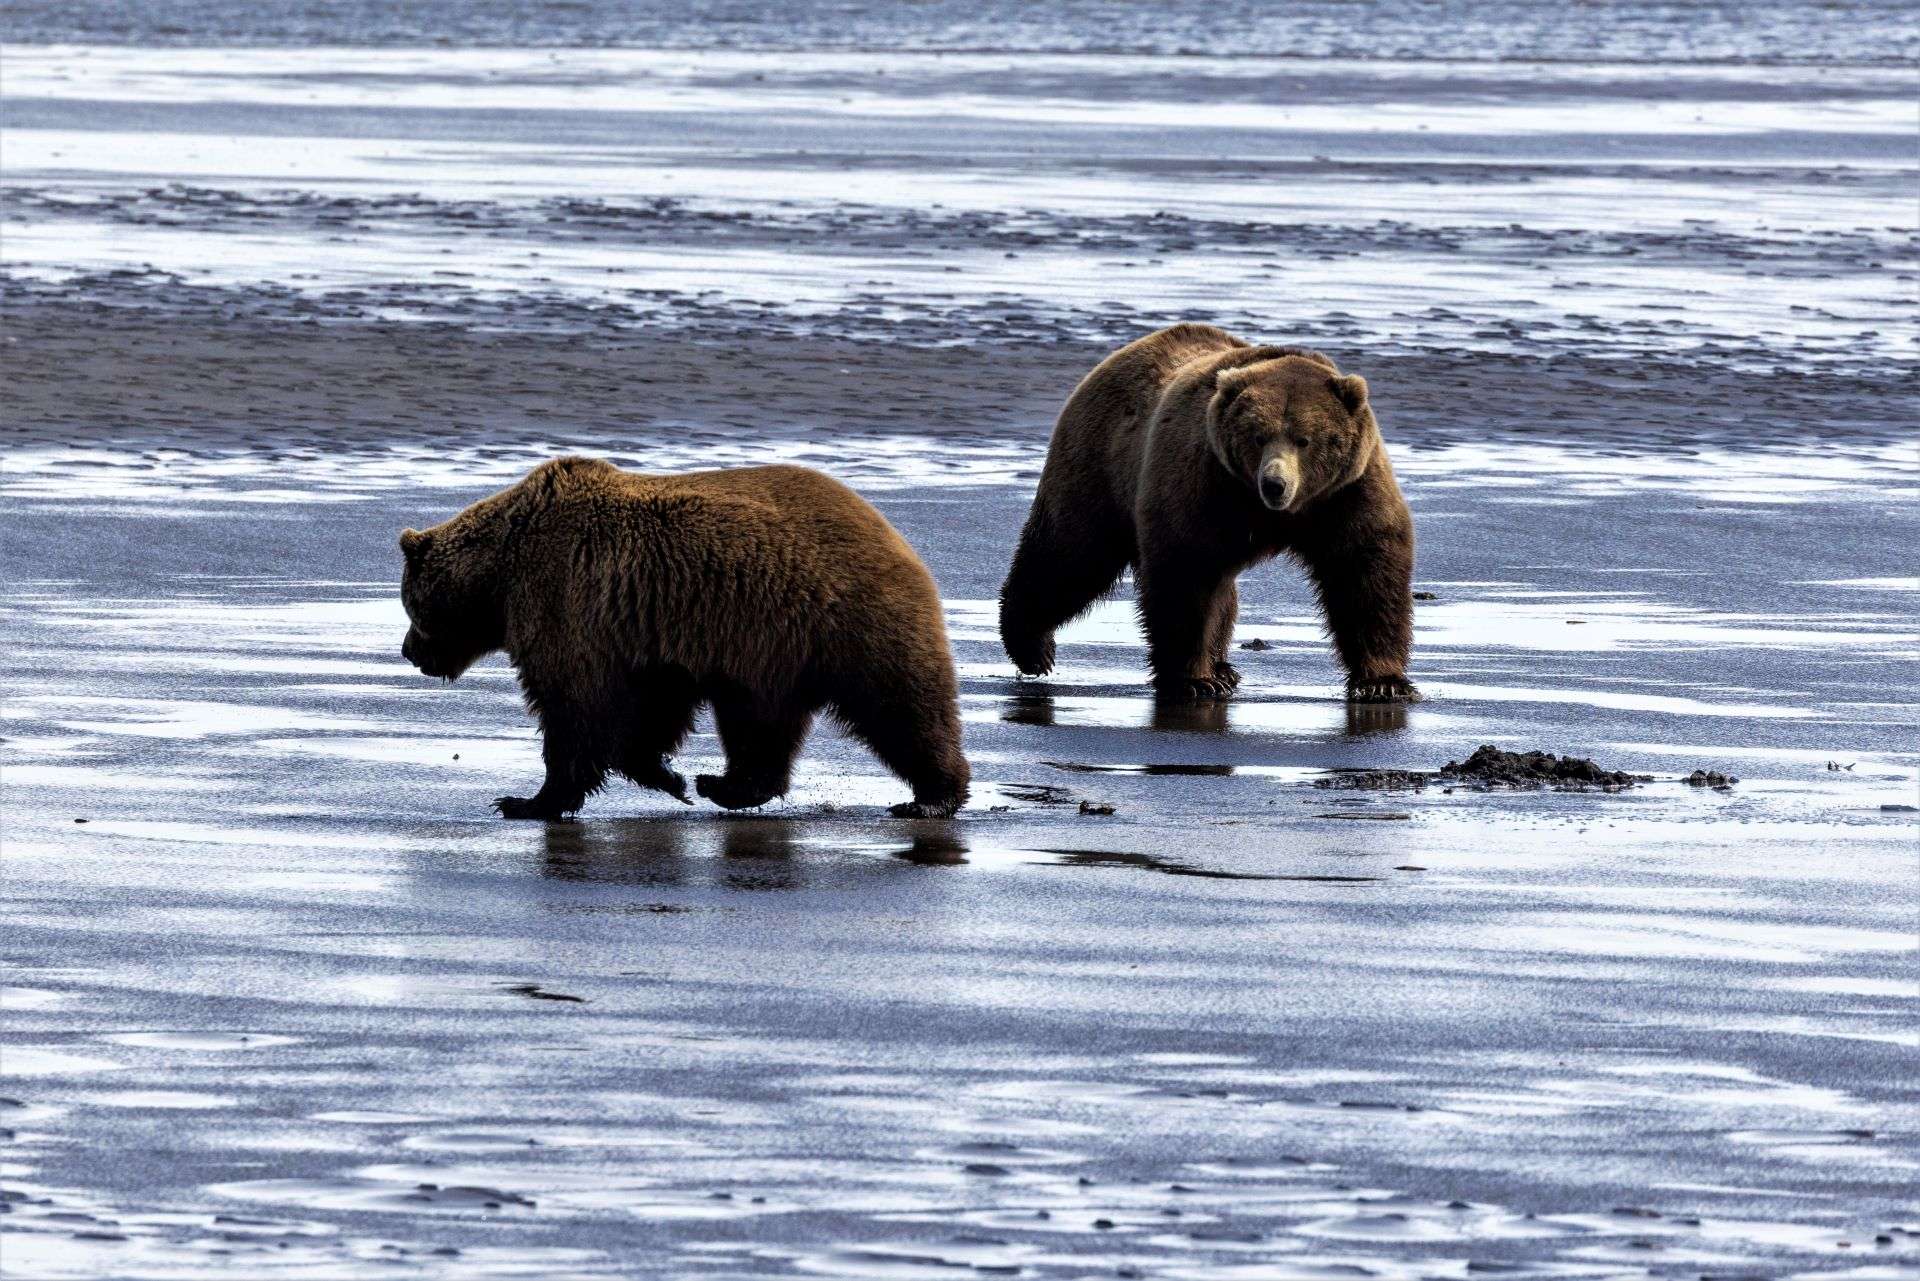 Two Bears looking for food in the water near the Bear camp in Alaska